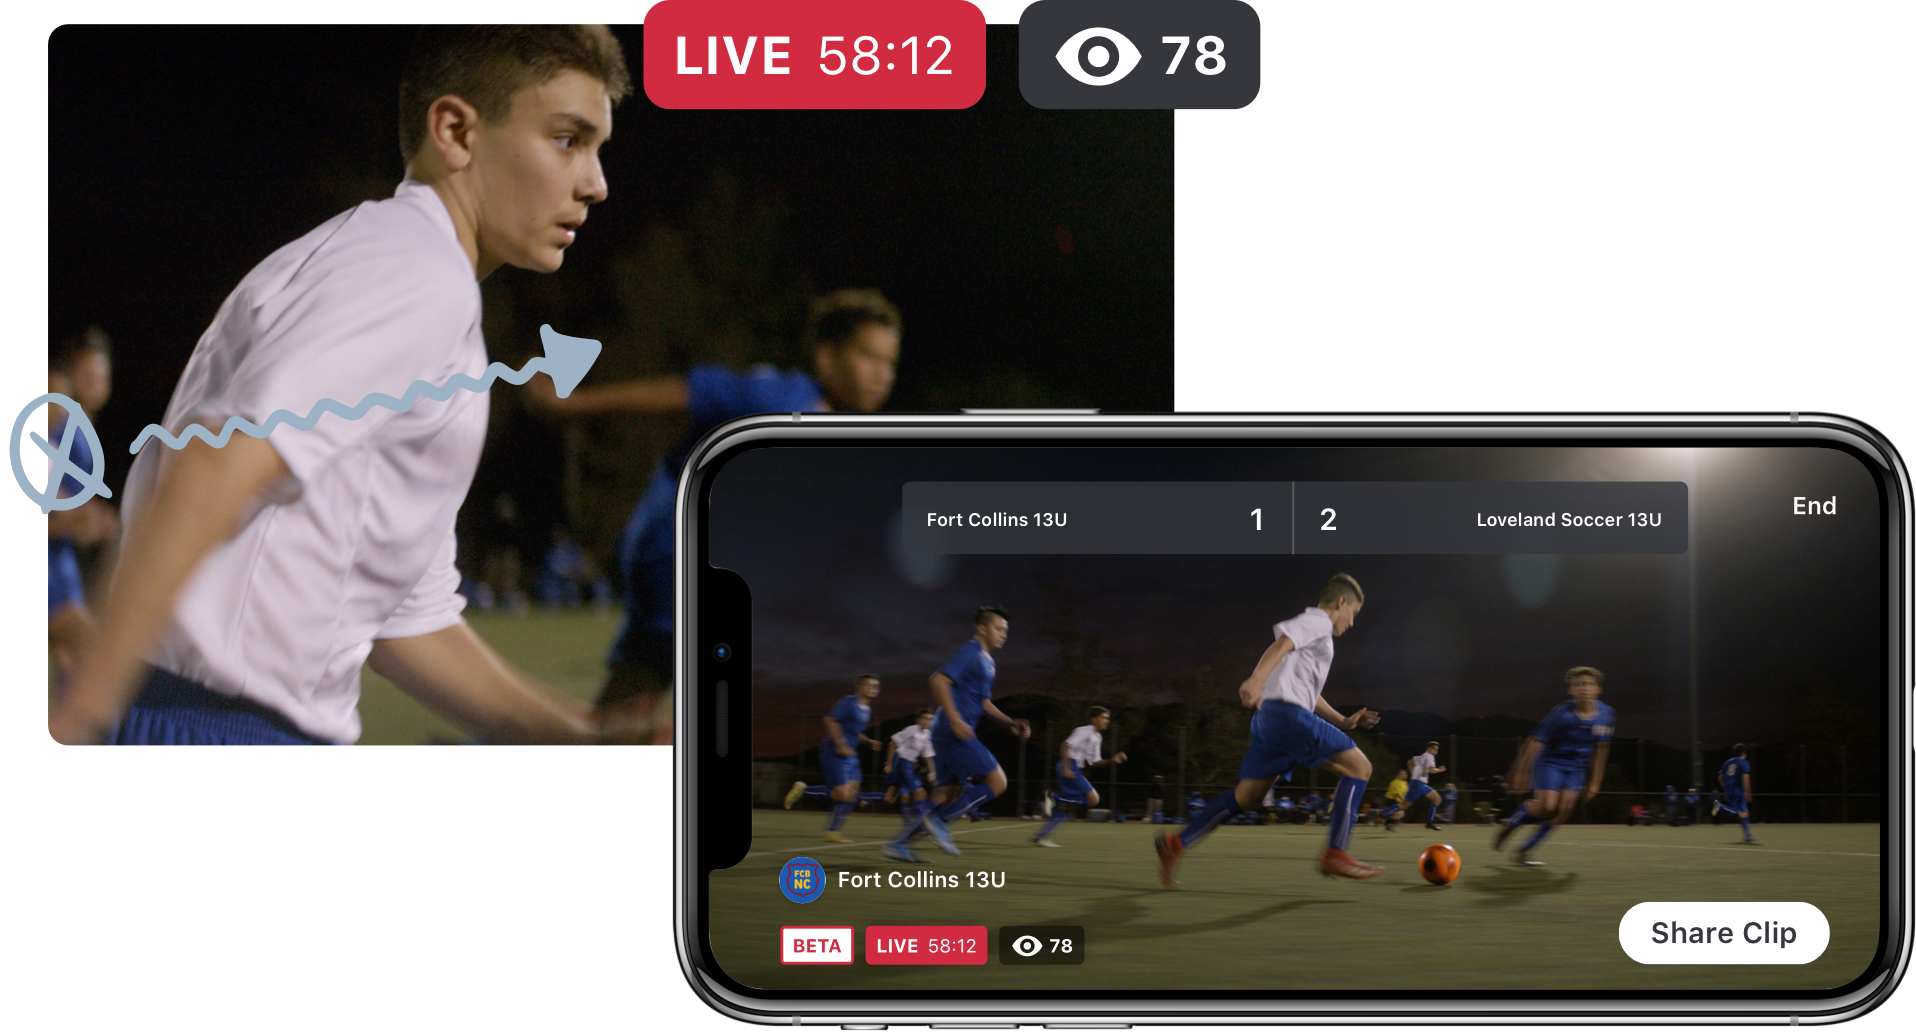 Live video streaming for soccer